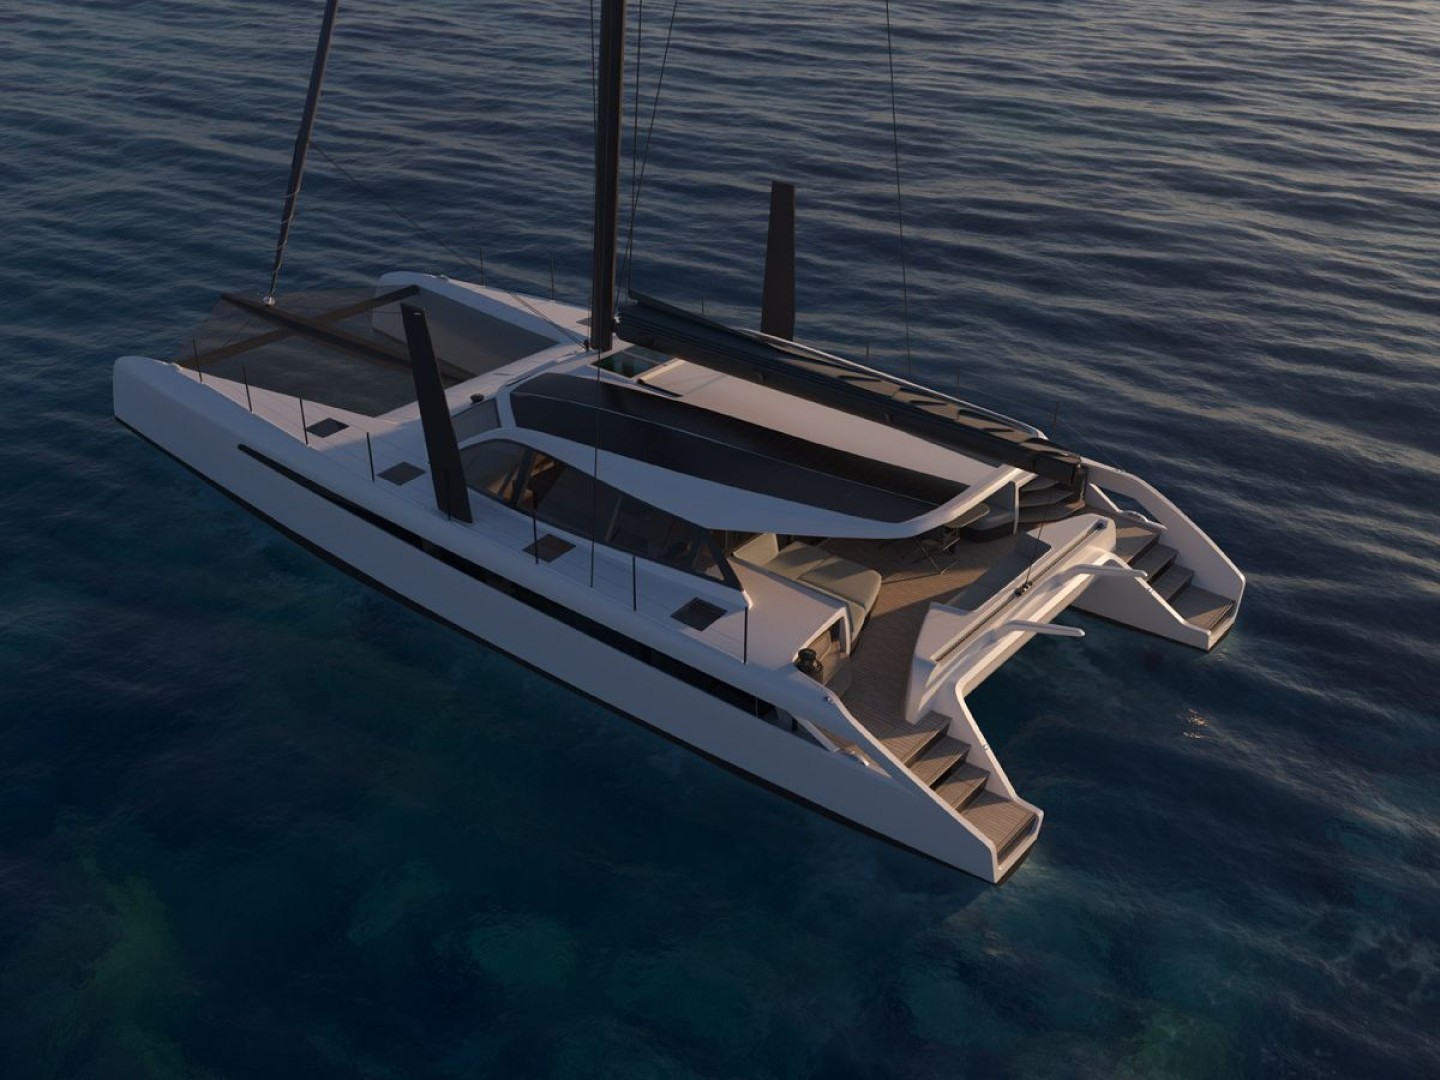 Evolved and reimagined: introducing the new Gunboat 70 Design